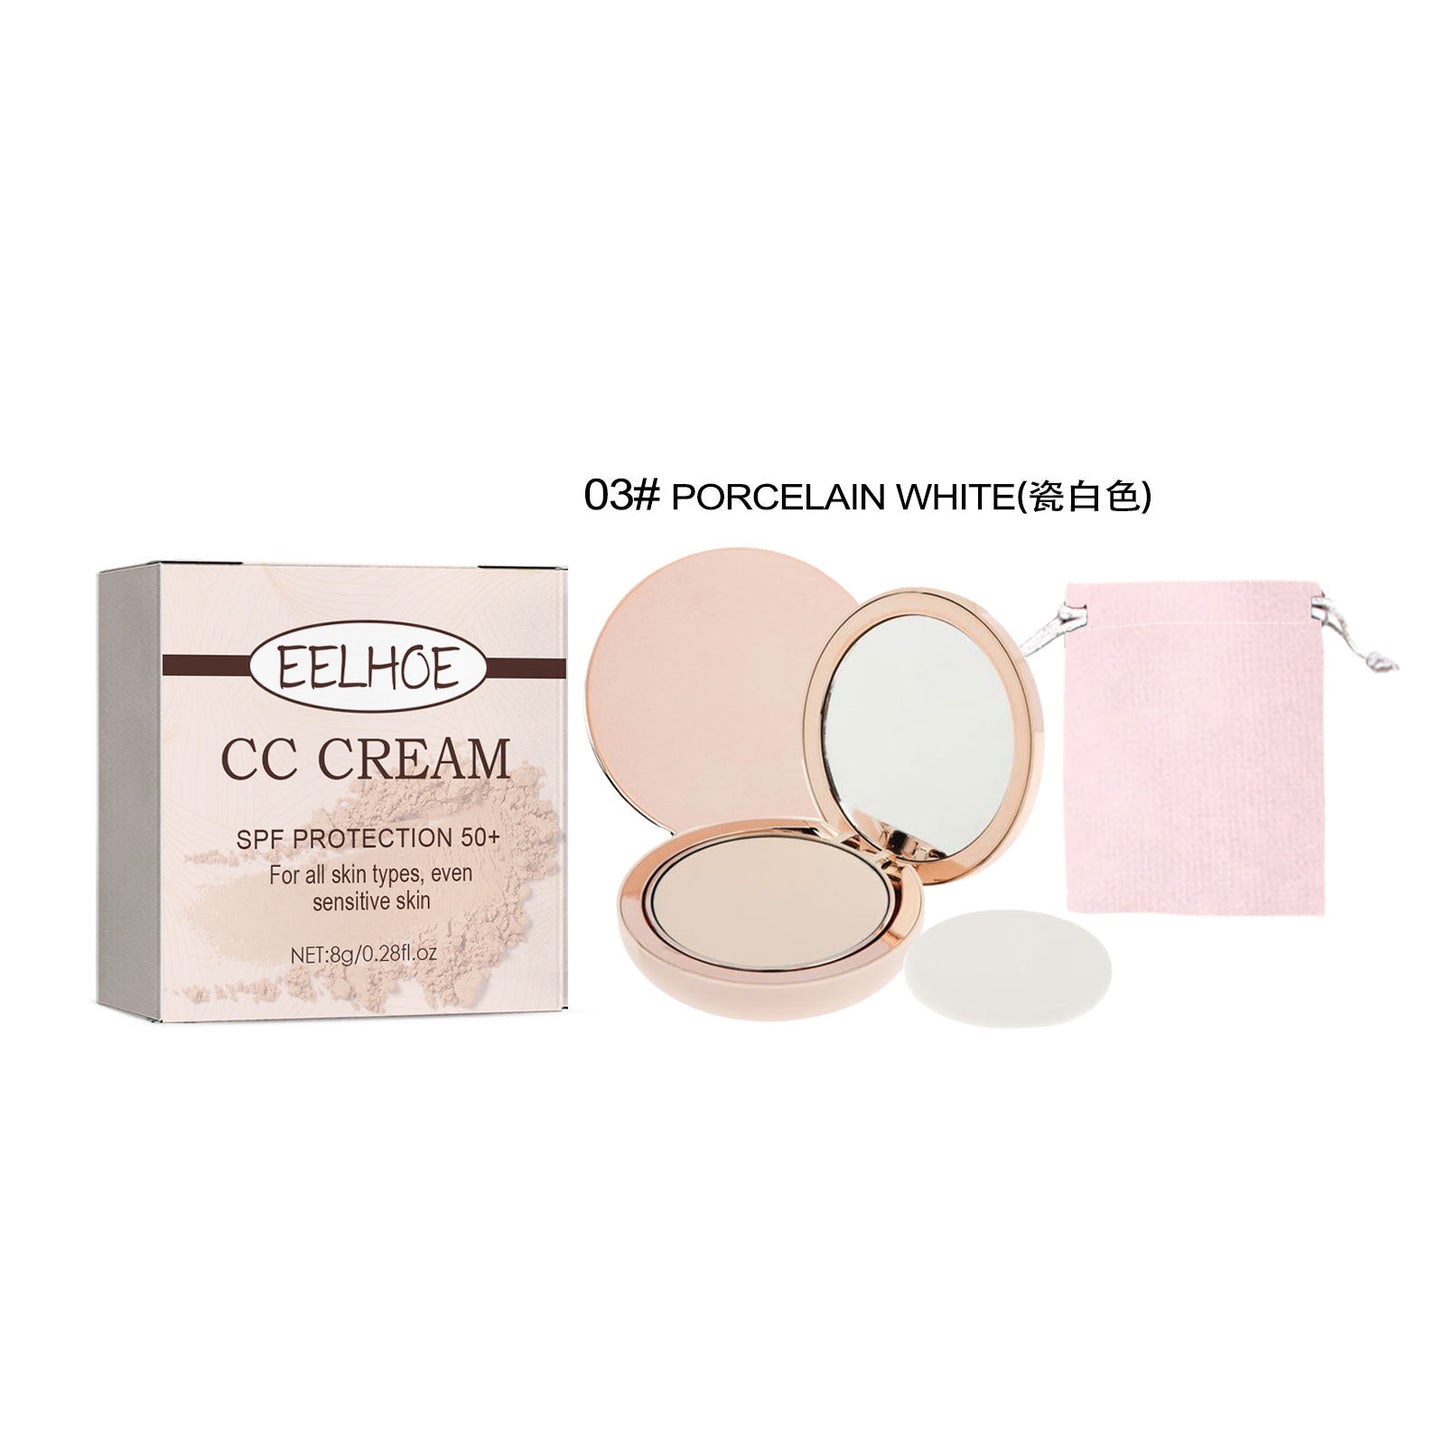 Skin Protection Lightweight Breathable Durable Not Easy To Makeup Natural Concealing And Setting Makeup Powder